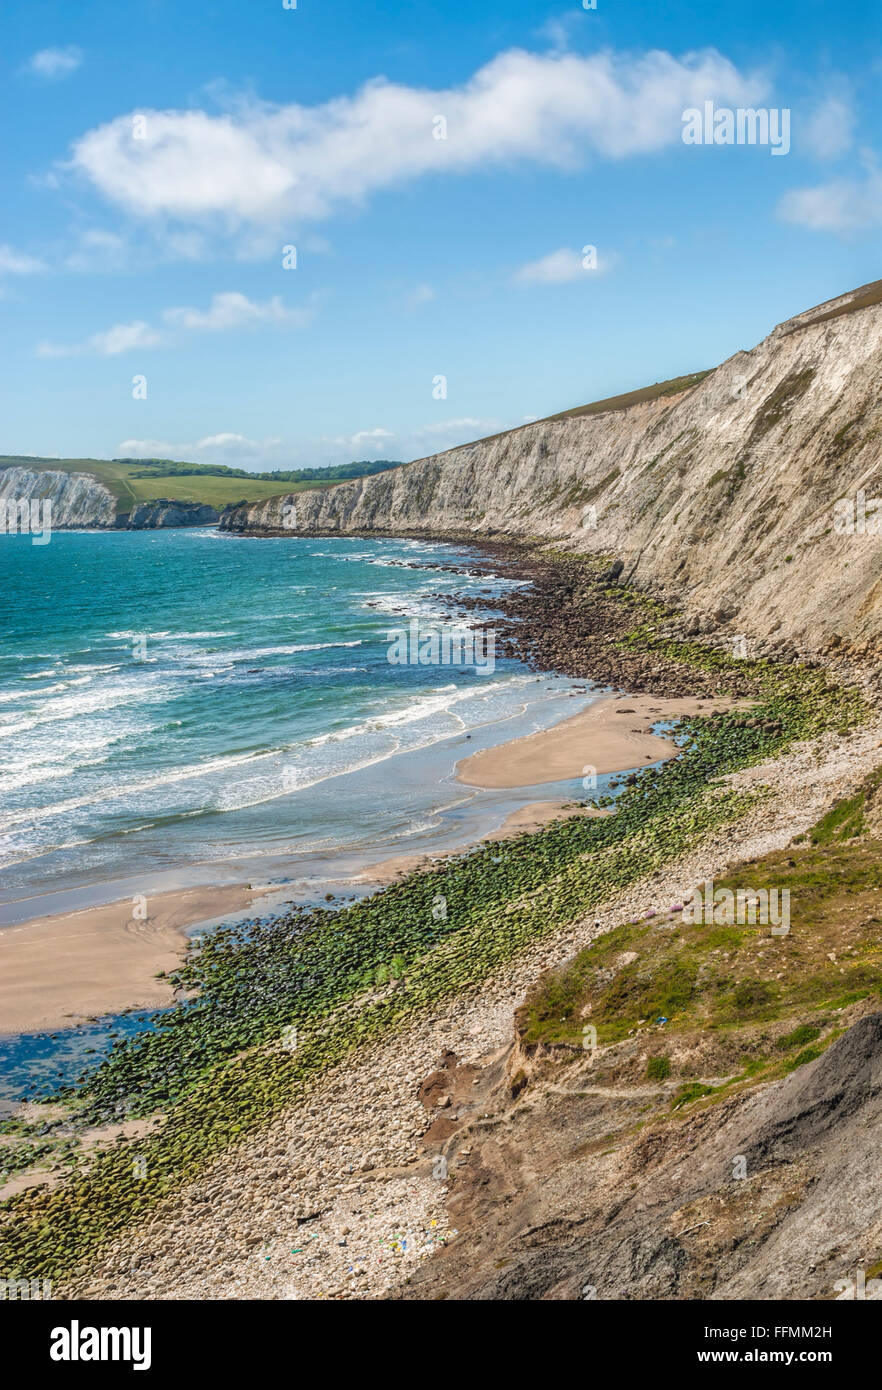 Landscape at southern coast of Isle of Wight, South England Stock Photo